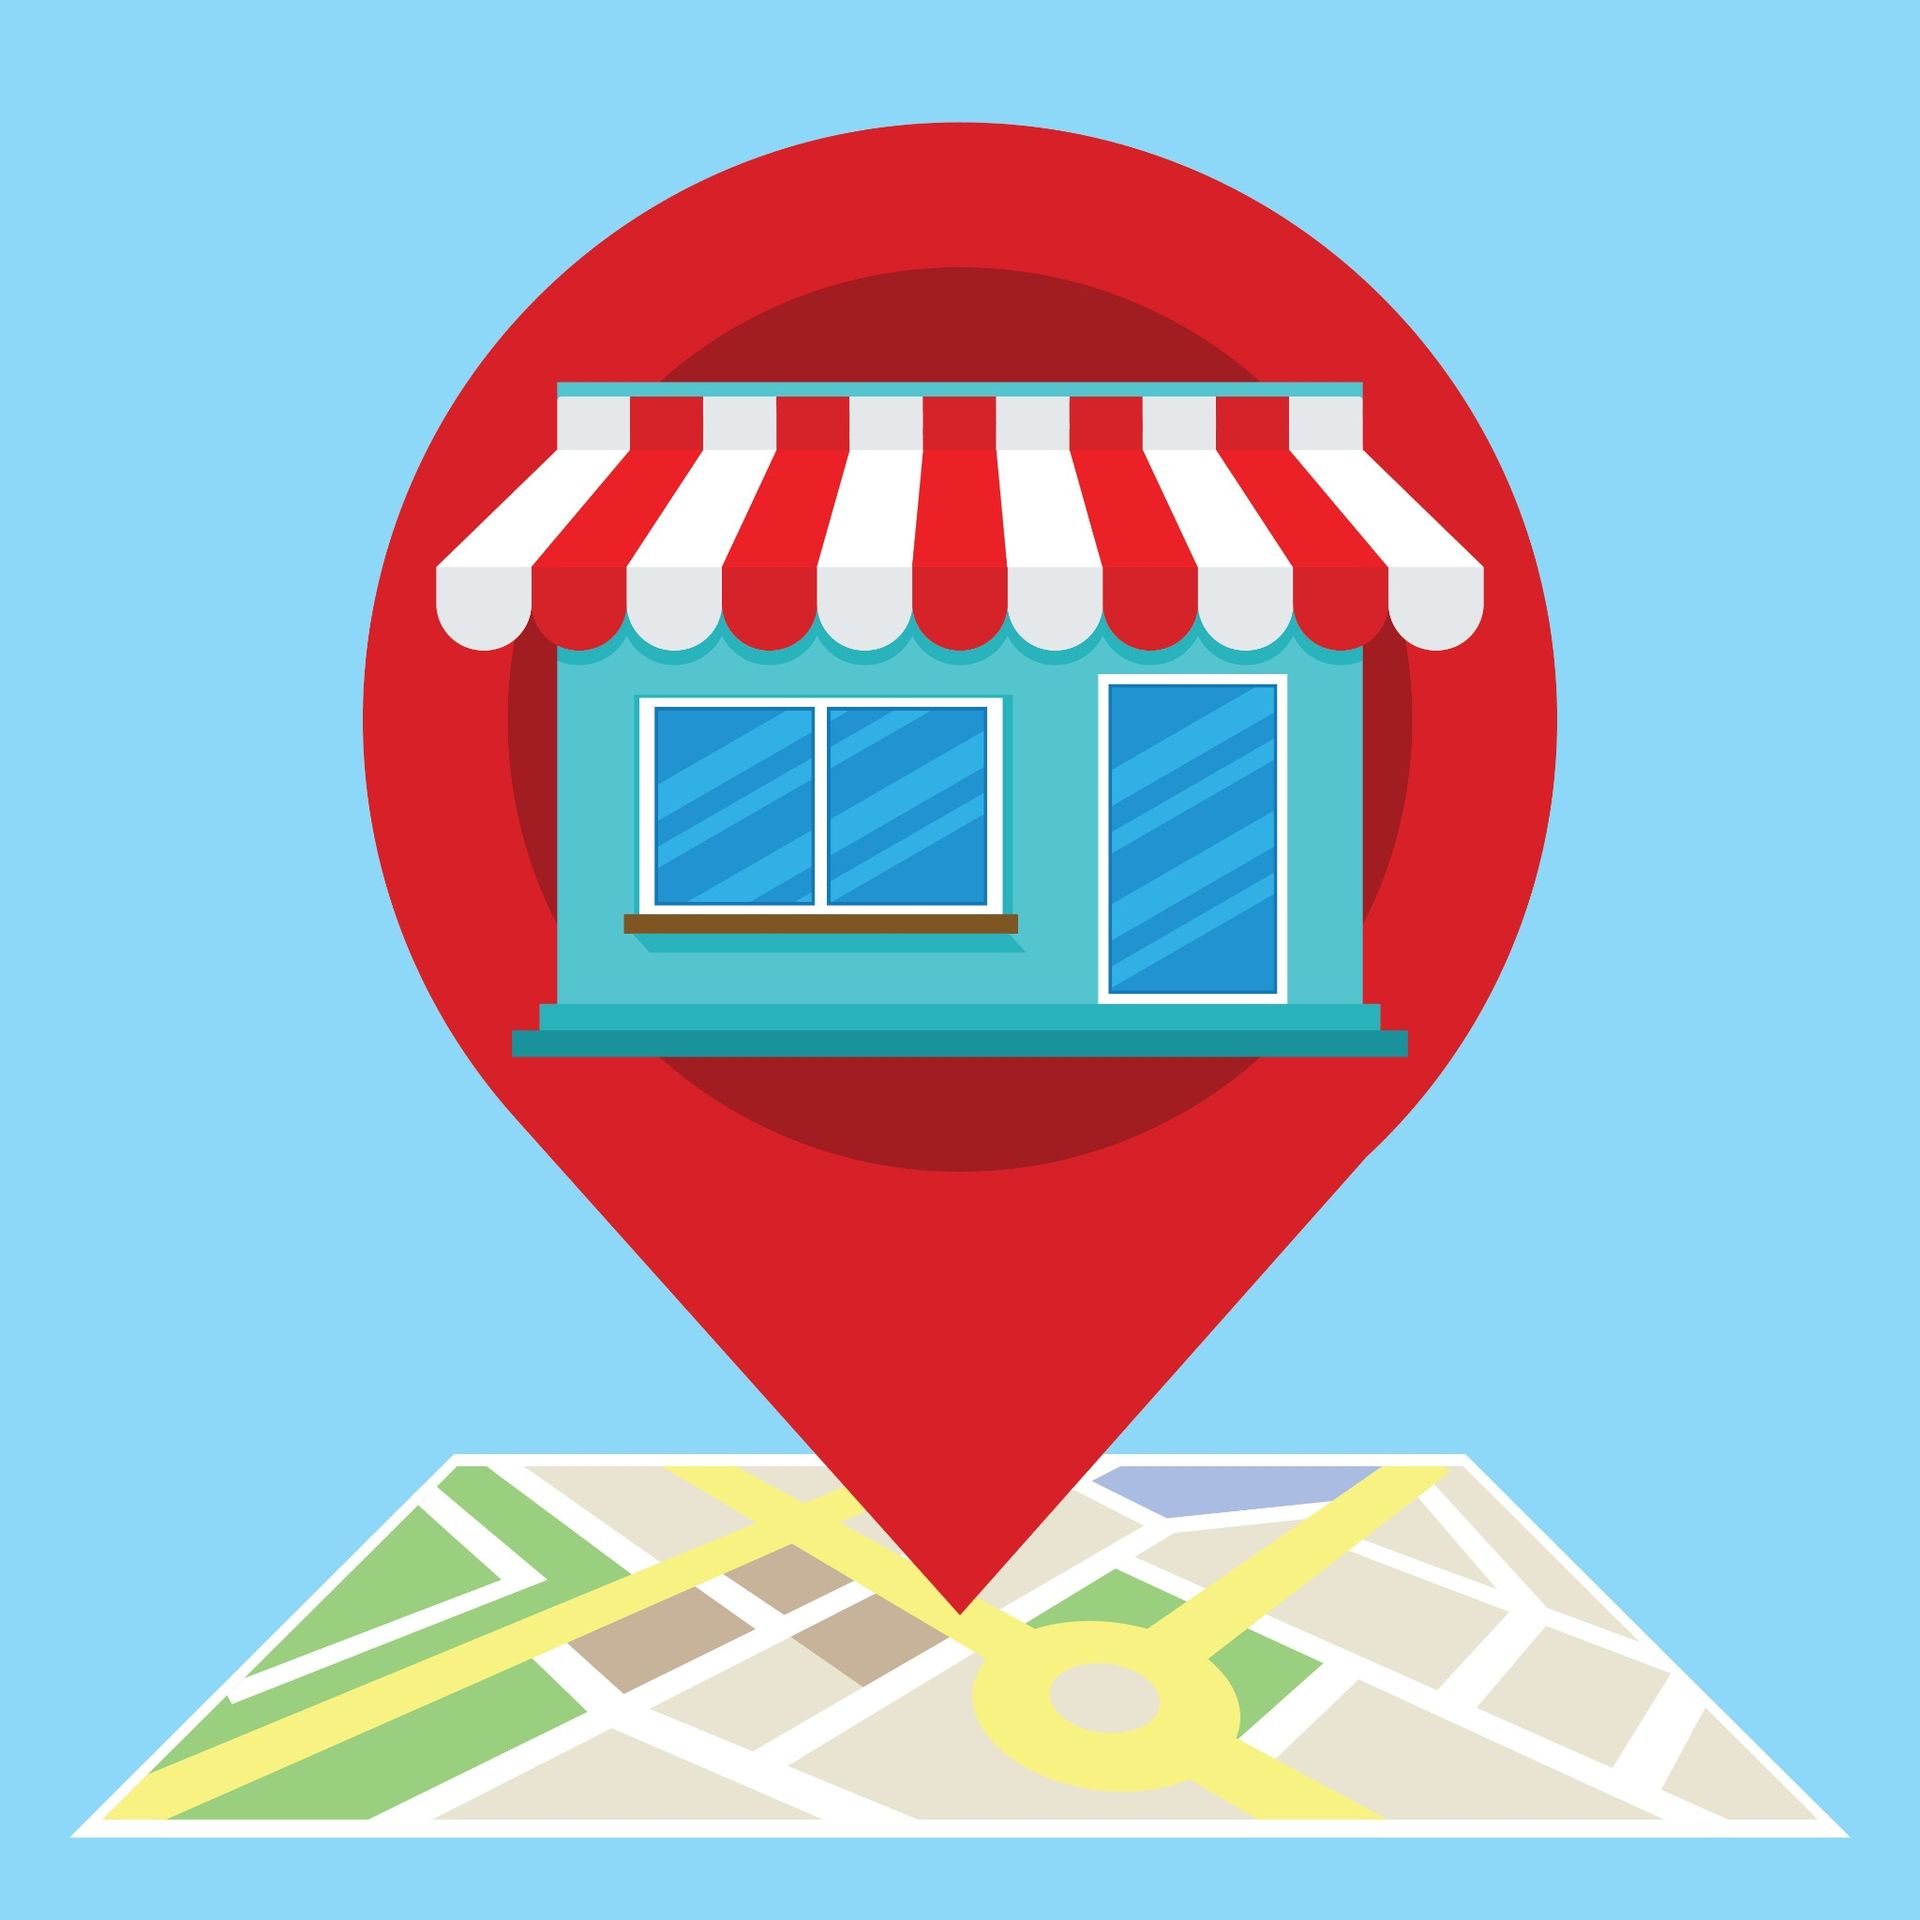 What Are Business Listings and Why Do They Matter?